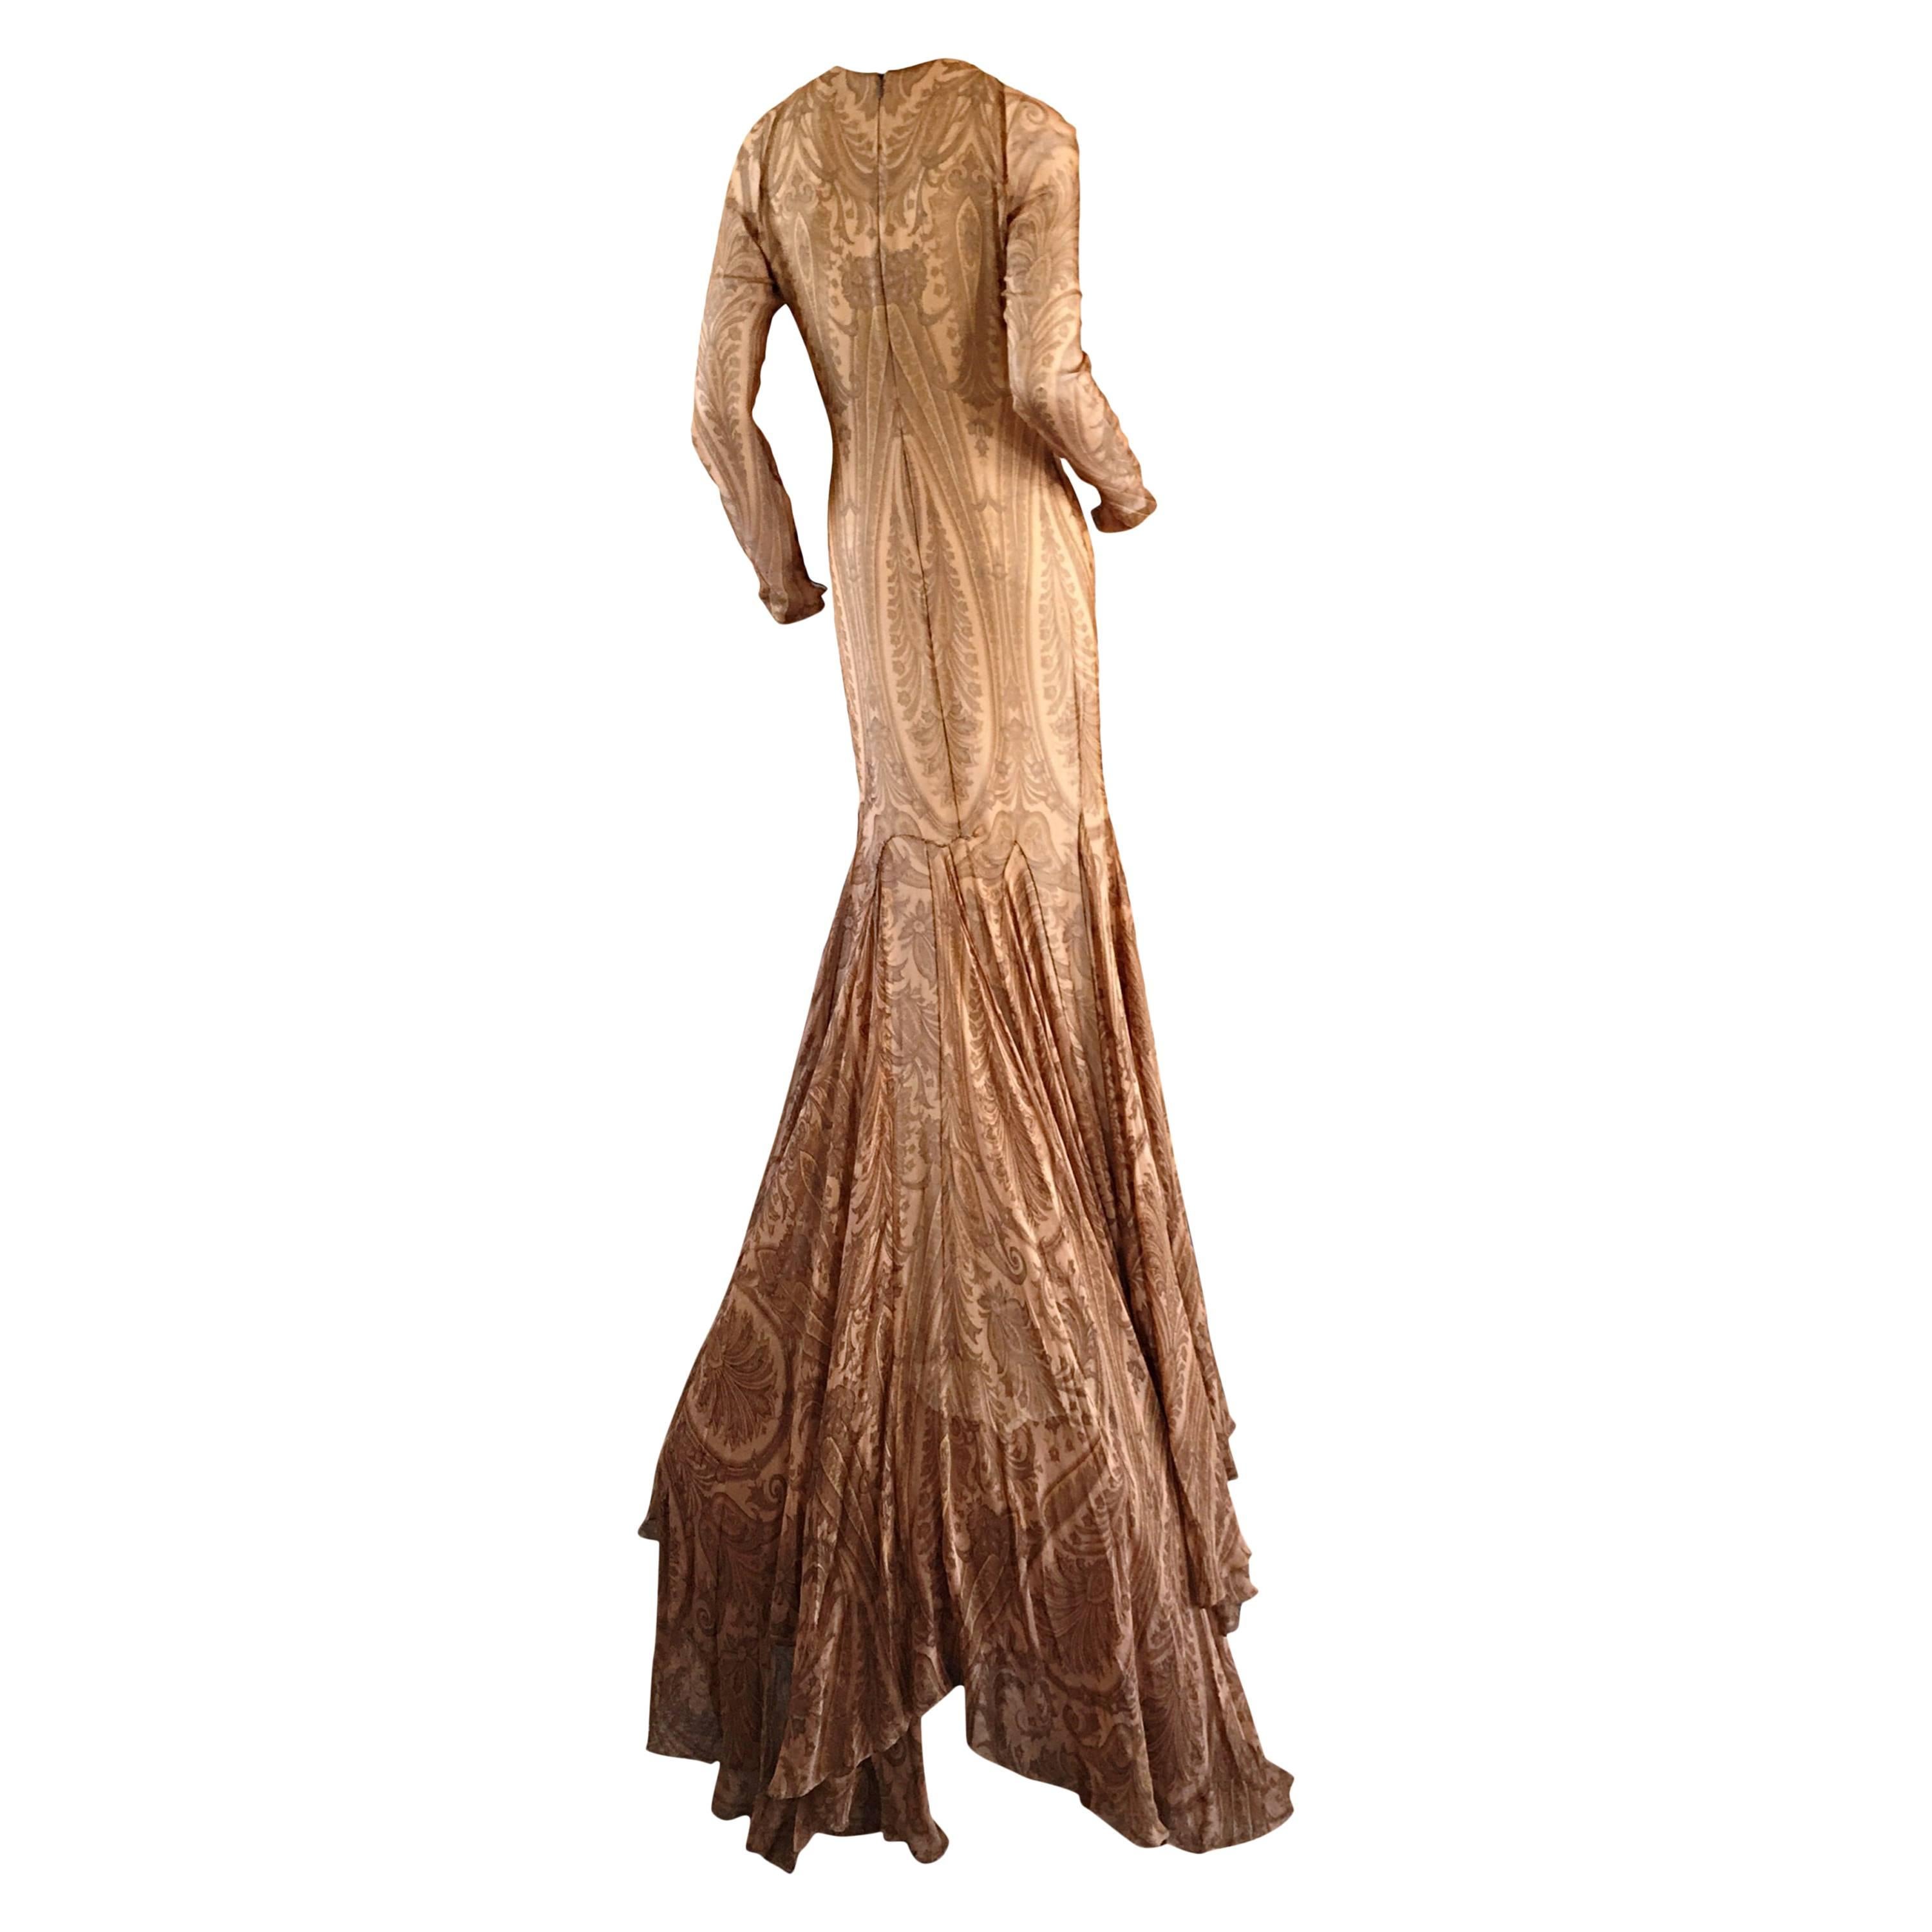 Exquisite vintage Bill Blass original runway sample gown!!! This dress features so much detail, and looks so incredible on. A one-of-a-kind MASTERPIECE!!! Layers of nude silk chiffon, with a 'tattoo' like paisley print throughout. Demi-Couture, with